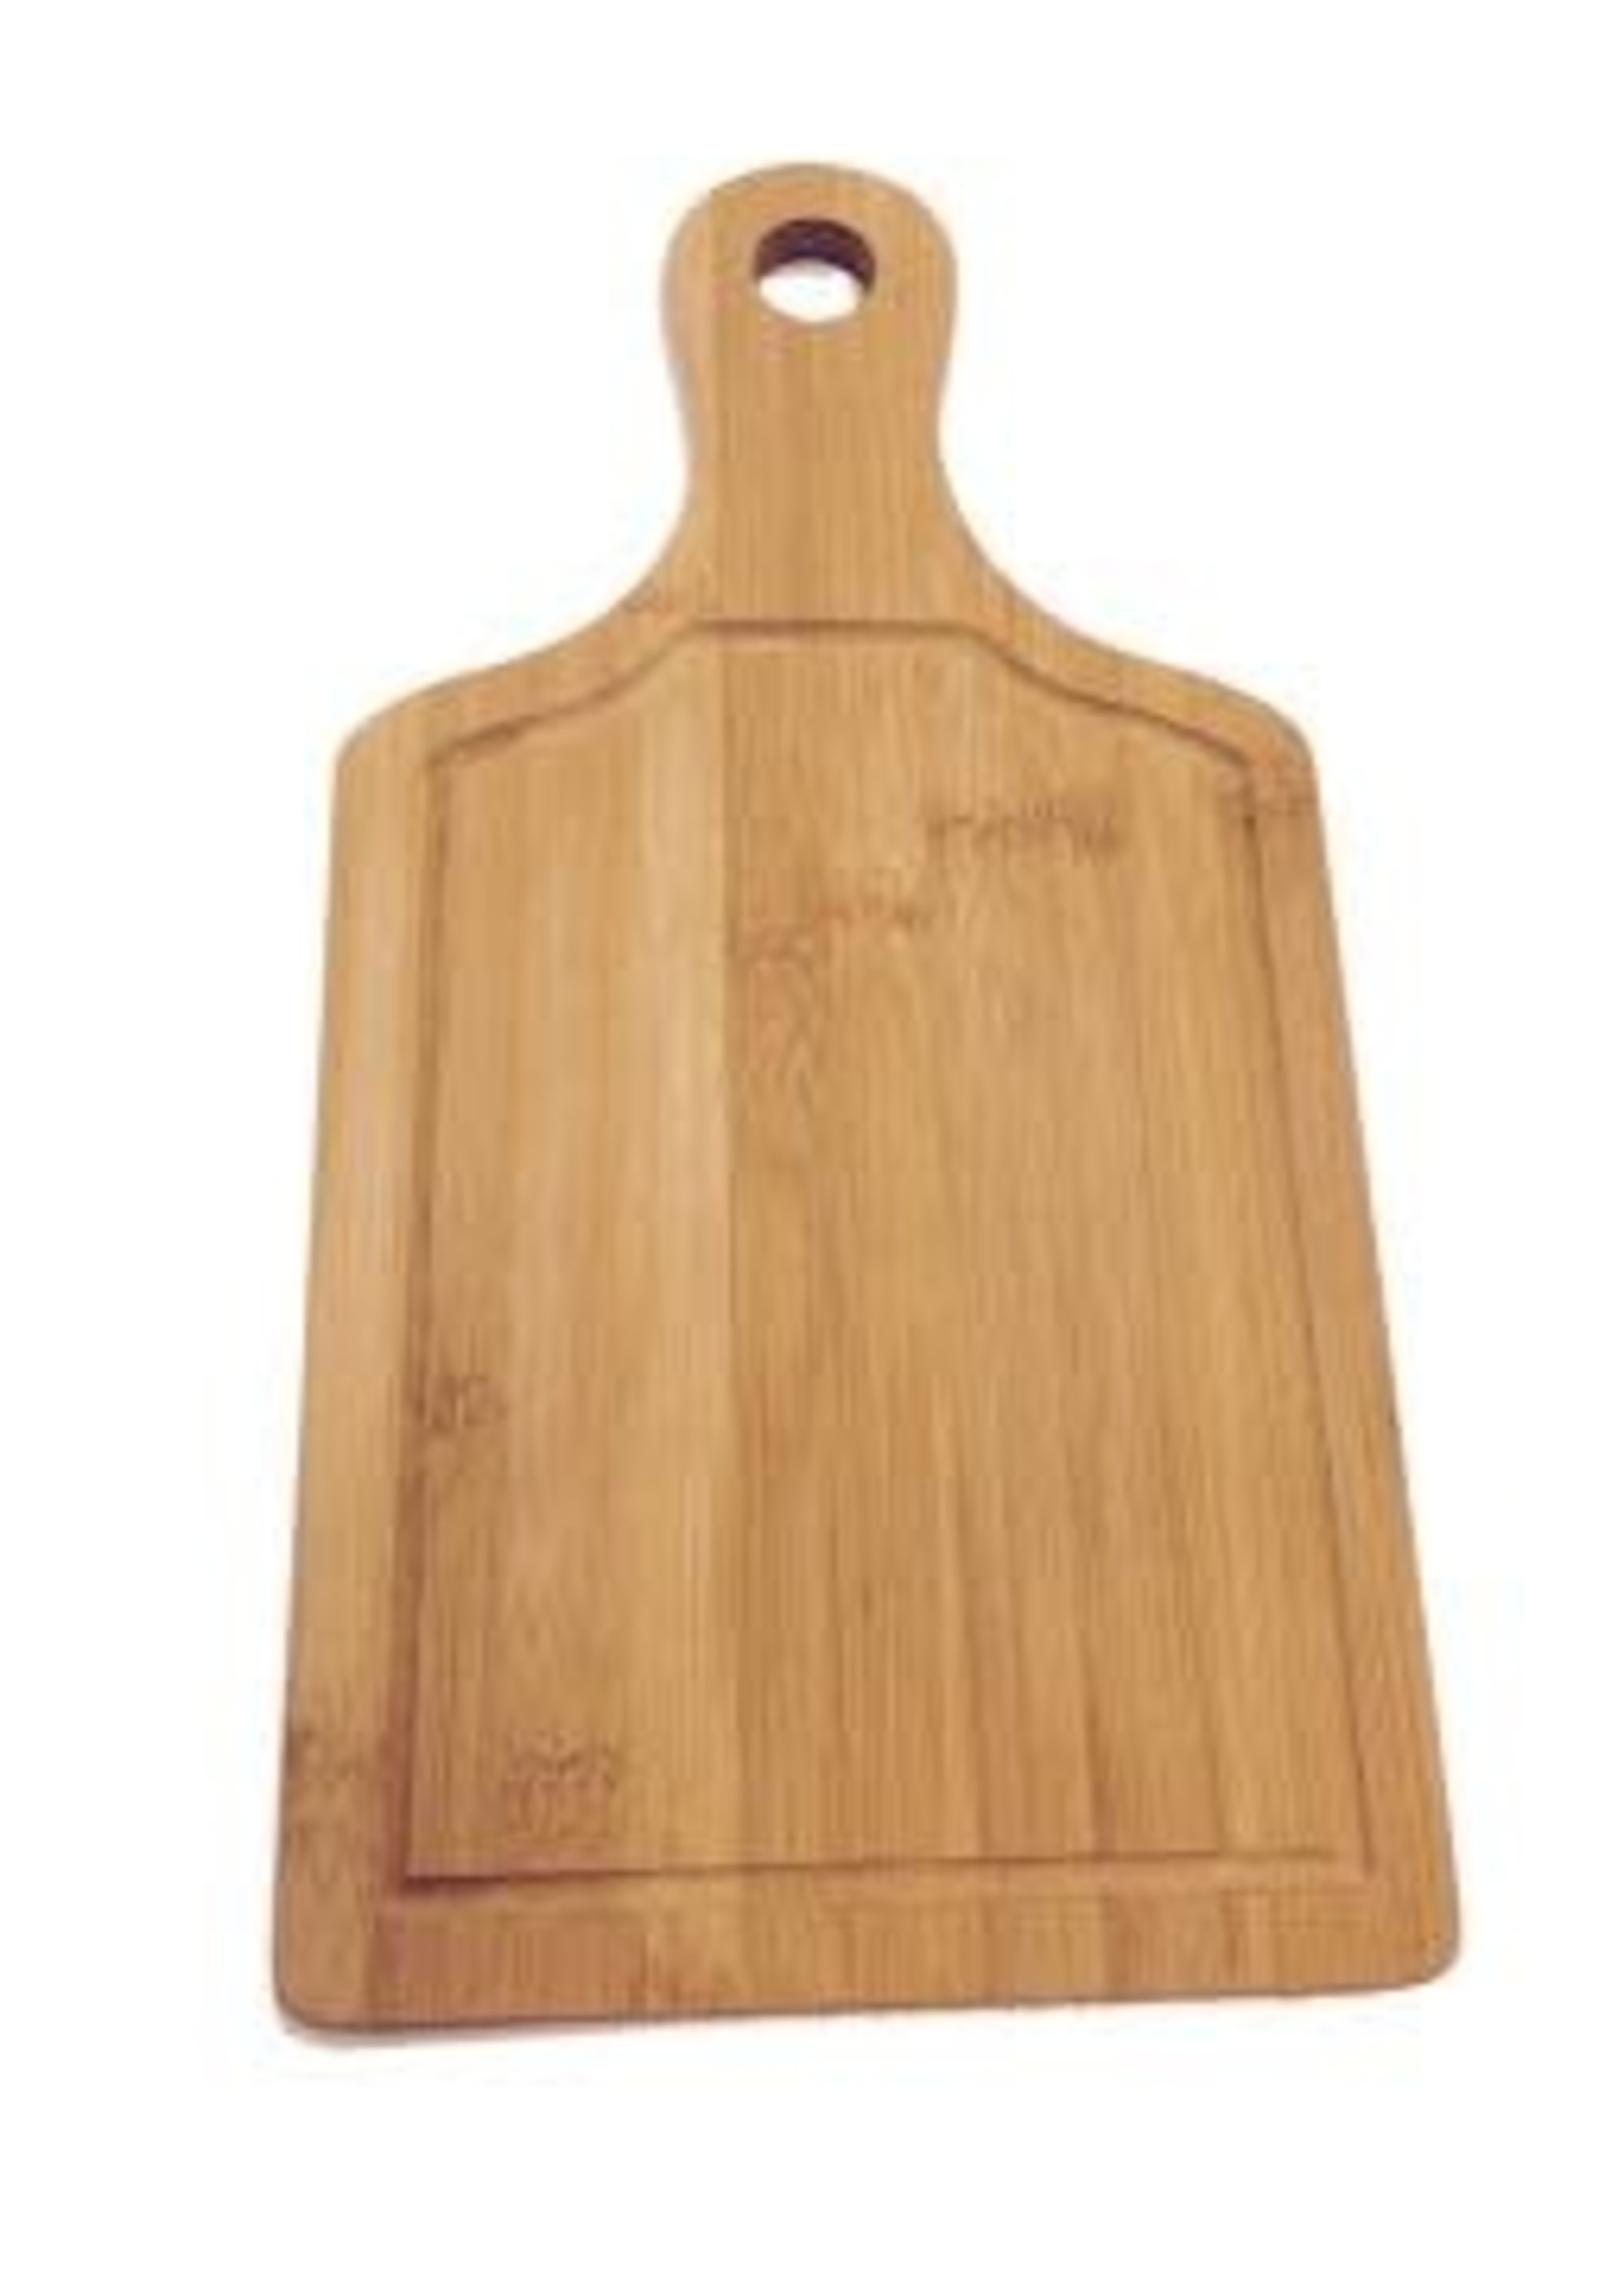 ITY INTERNATIONAL BAMBOO PADDLE BOARD 13.6 X 7INCHES